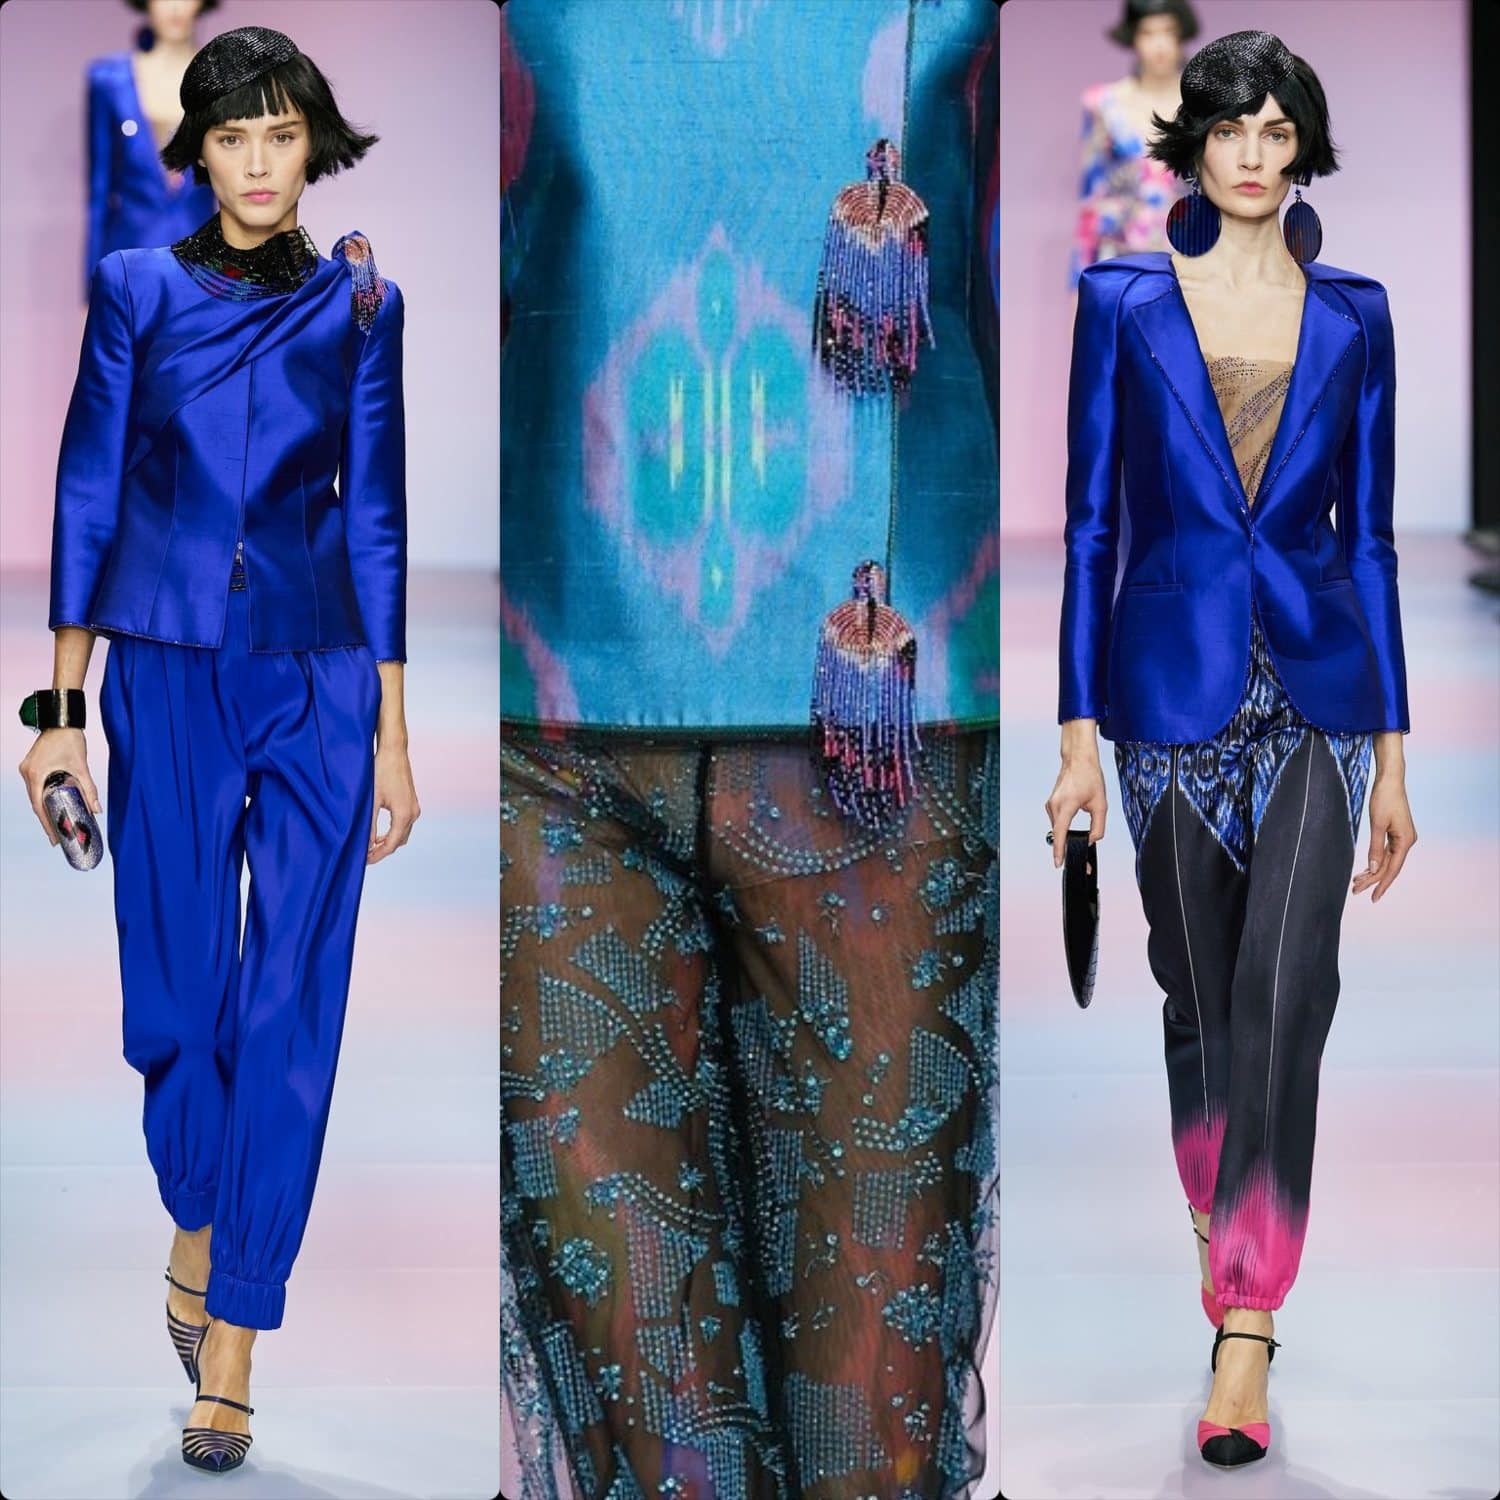 Armani Privé Haute Couture Spring Summer 2020 Paris. RUNWAY MAGAZINE ® Collections. RUNWAY NOW / RUNWAY NEW